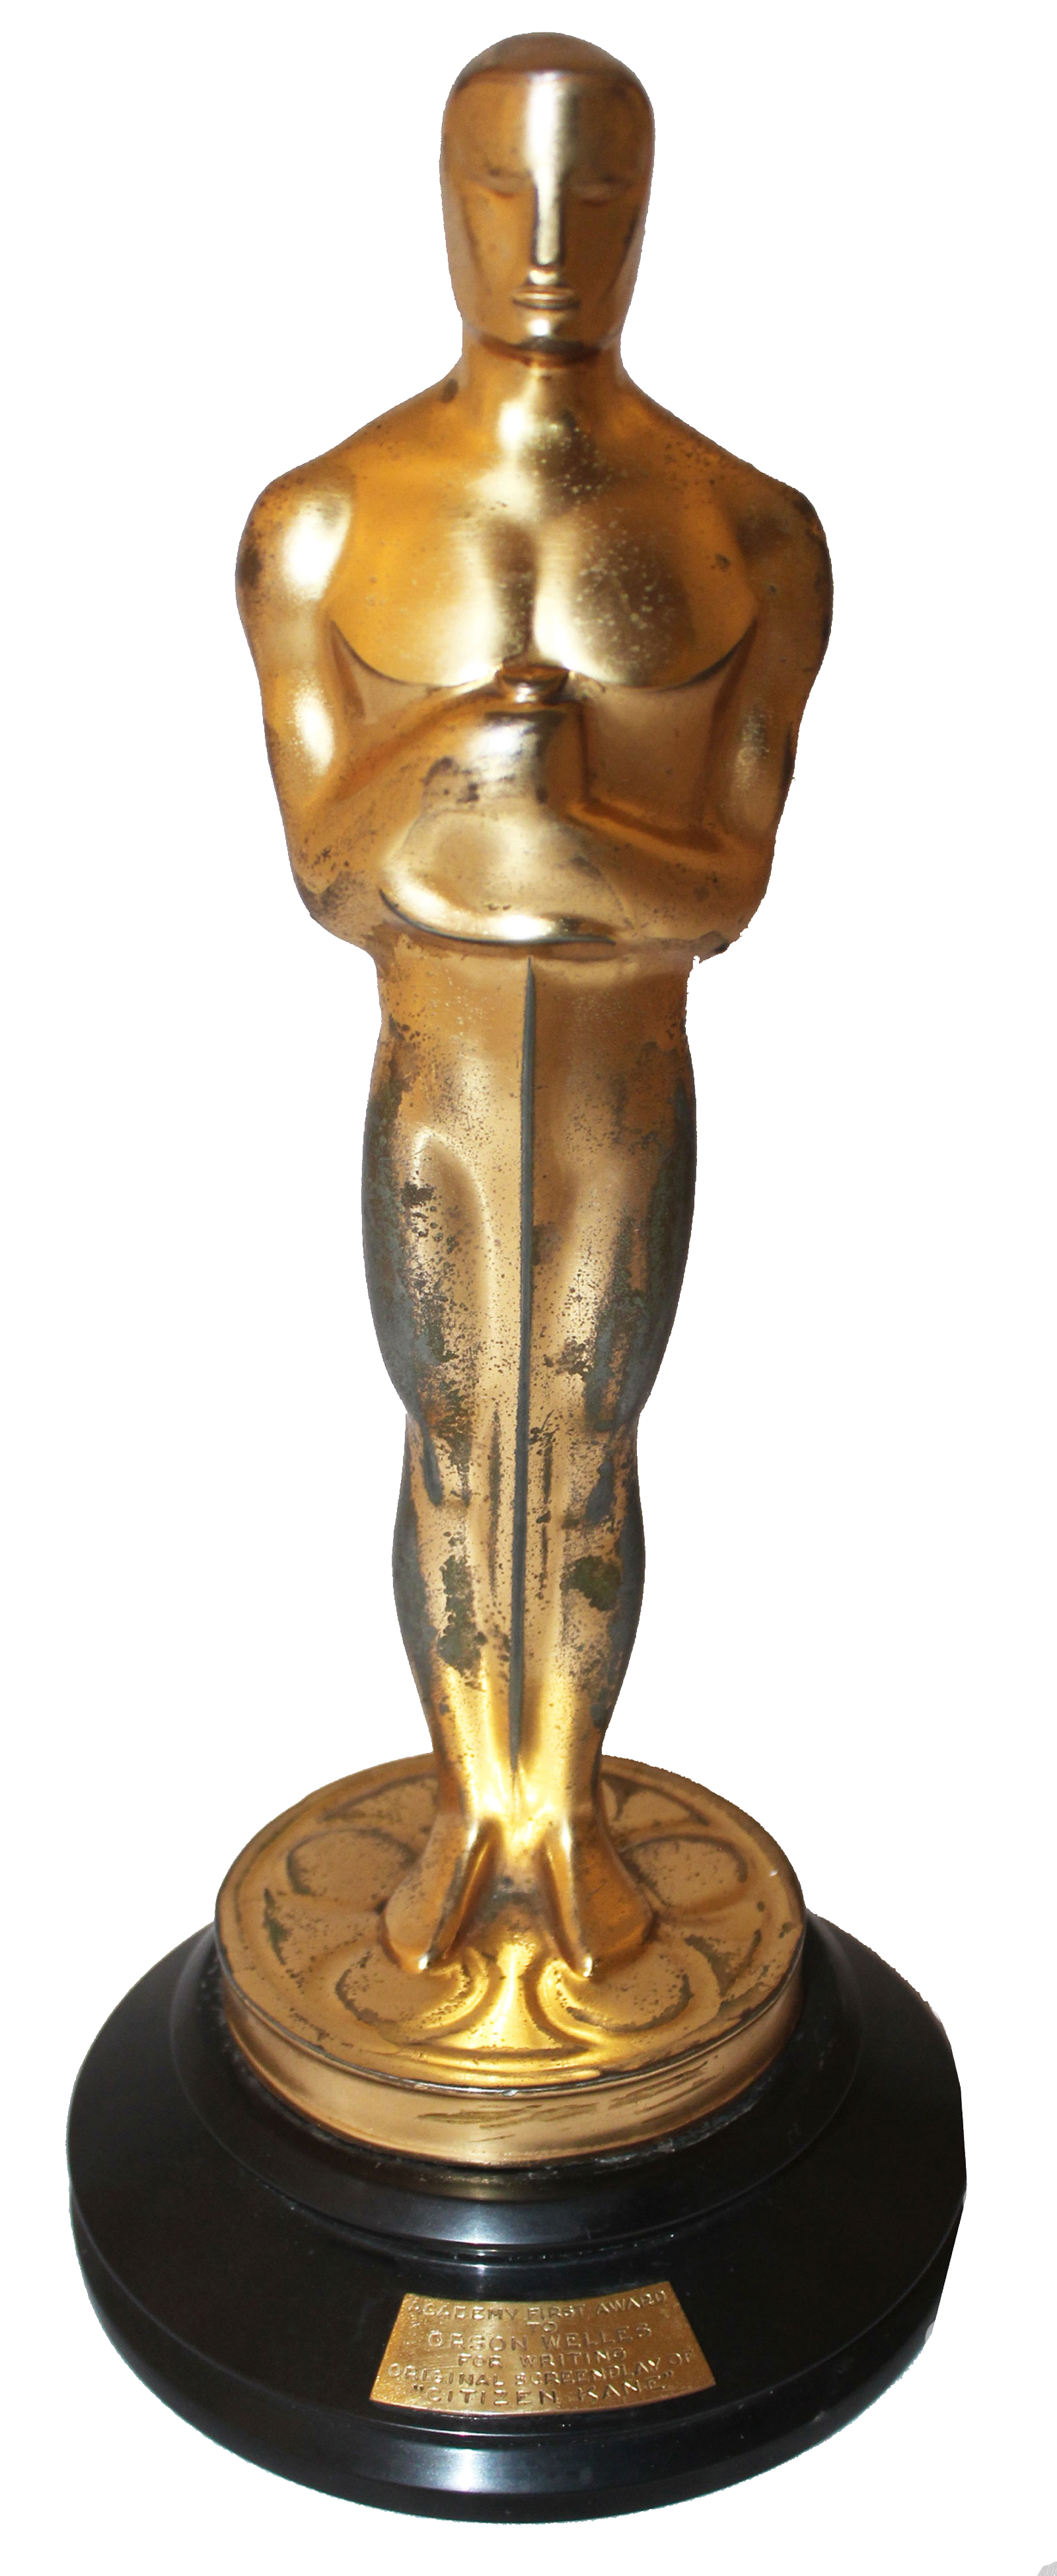 Oscar Academy Awards PNG Free File Download